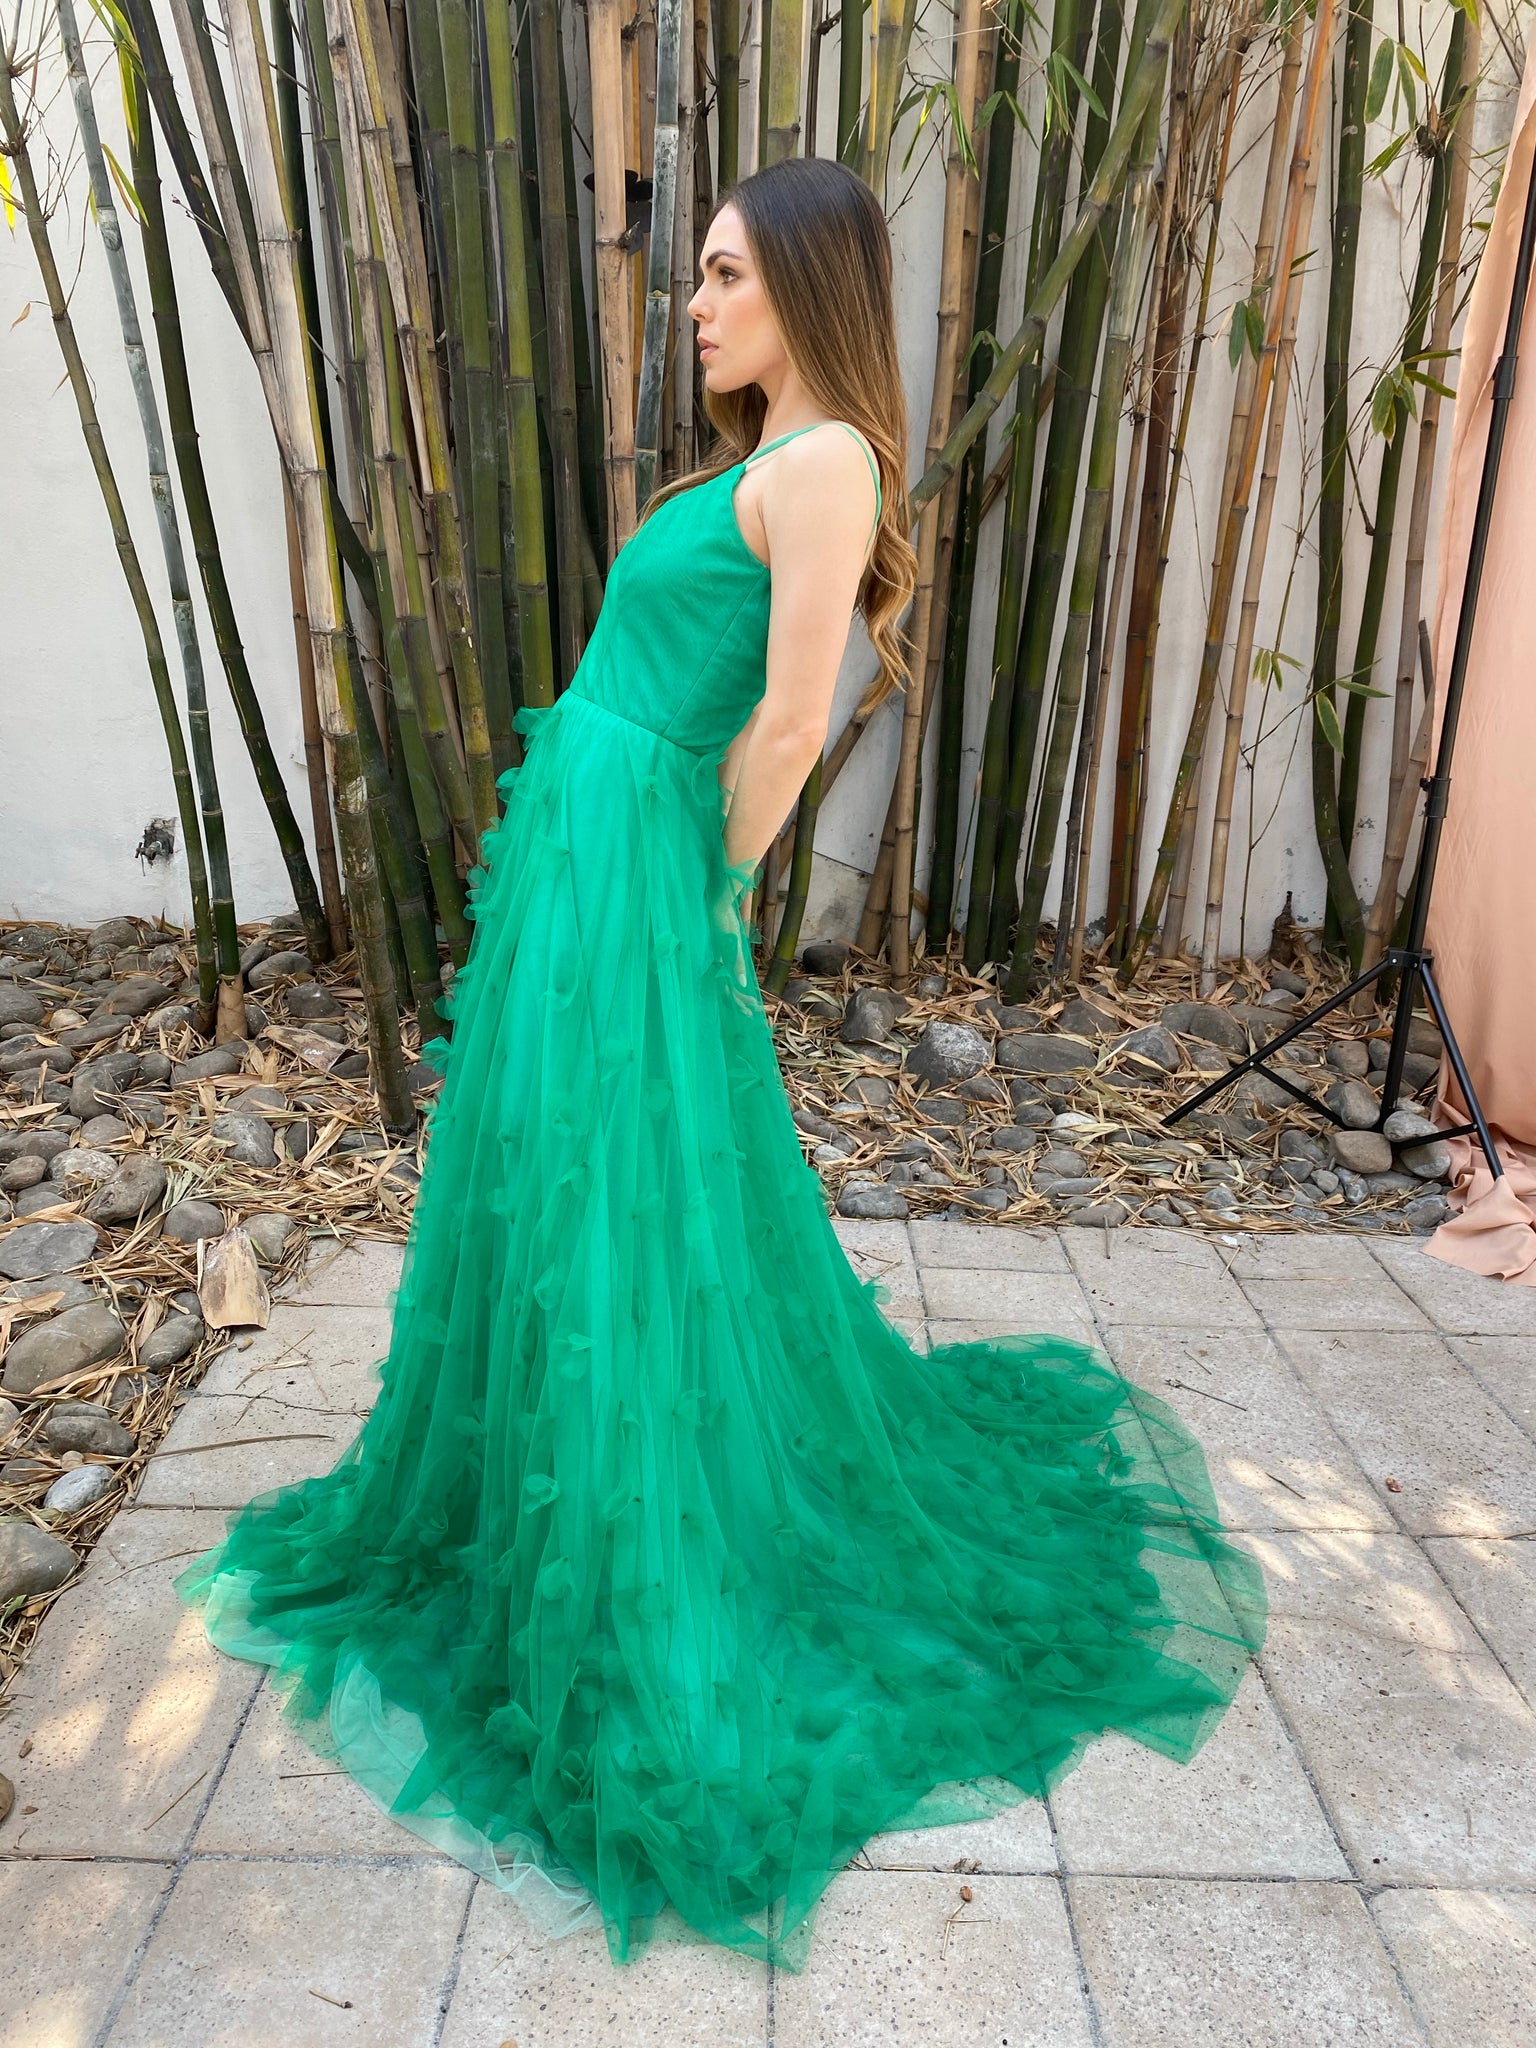 Green tulle gown